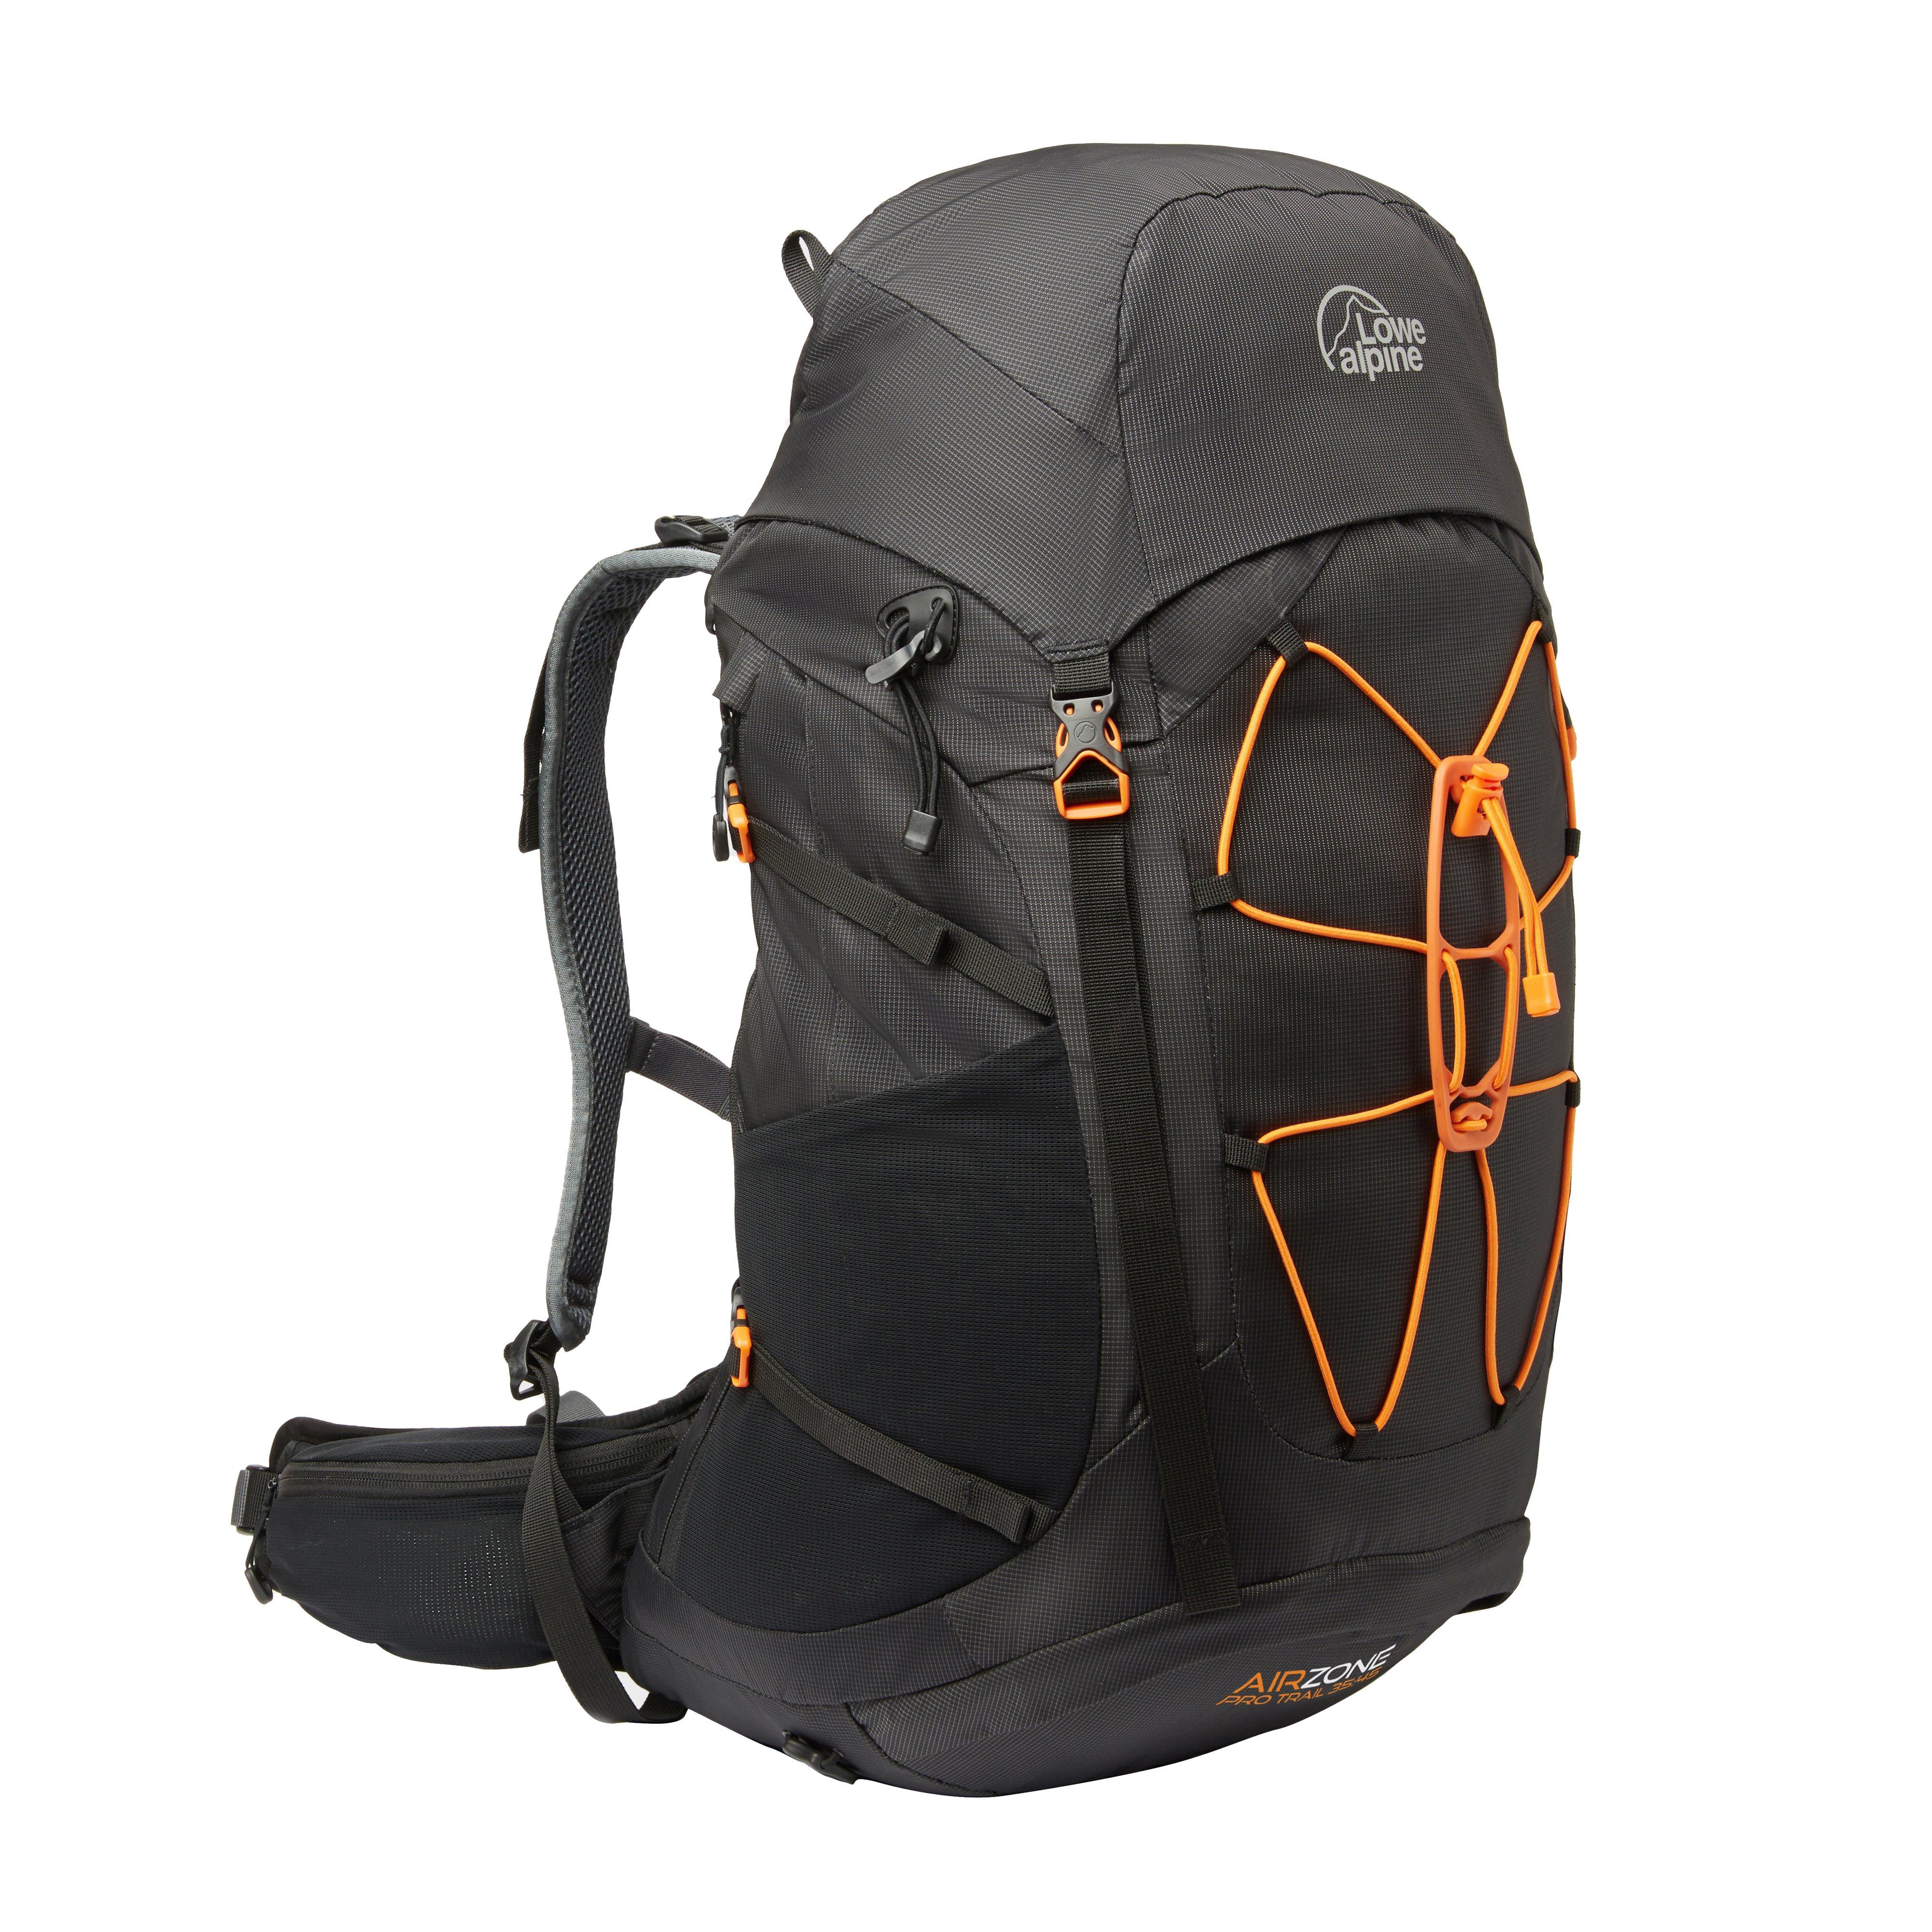 Lowe Alpine Protrail 35:45 Backpack Review